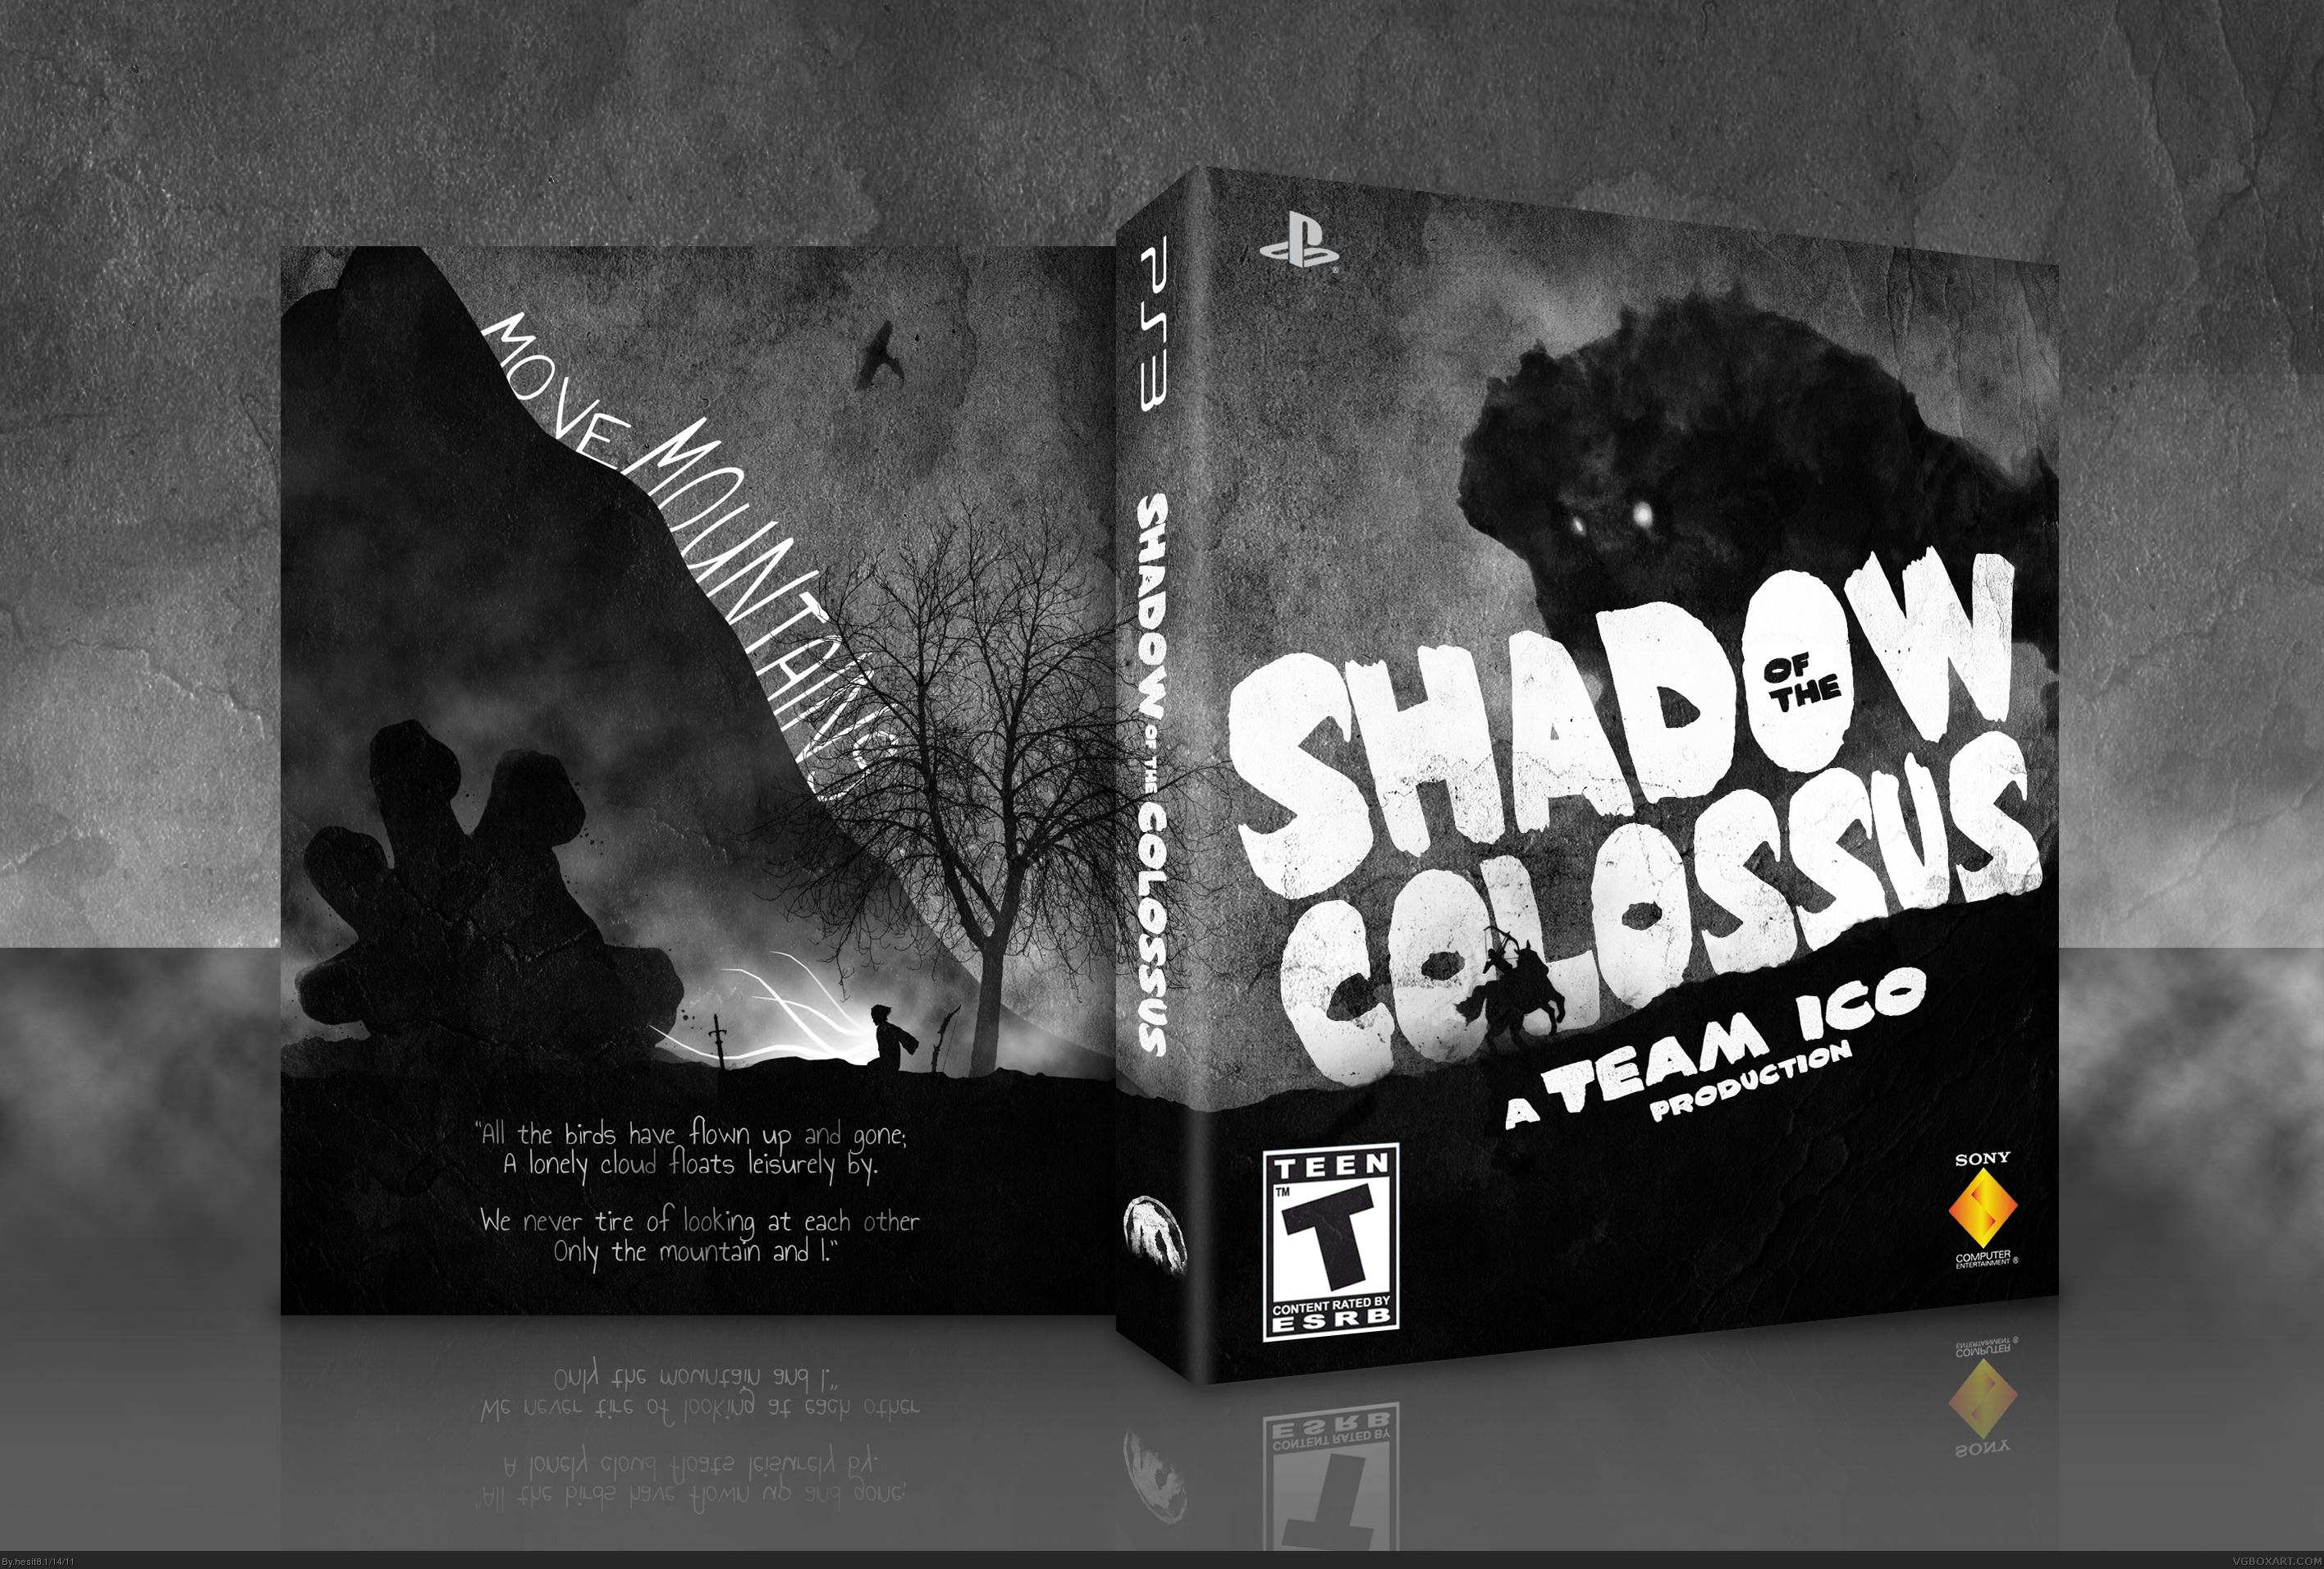 Shadow Of The Colossus box cover